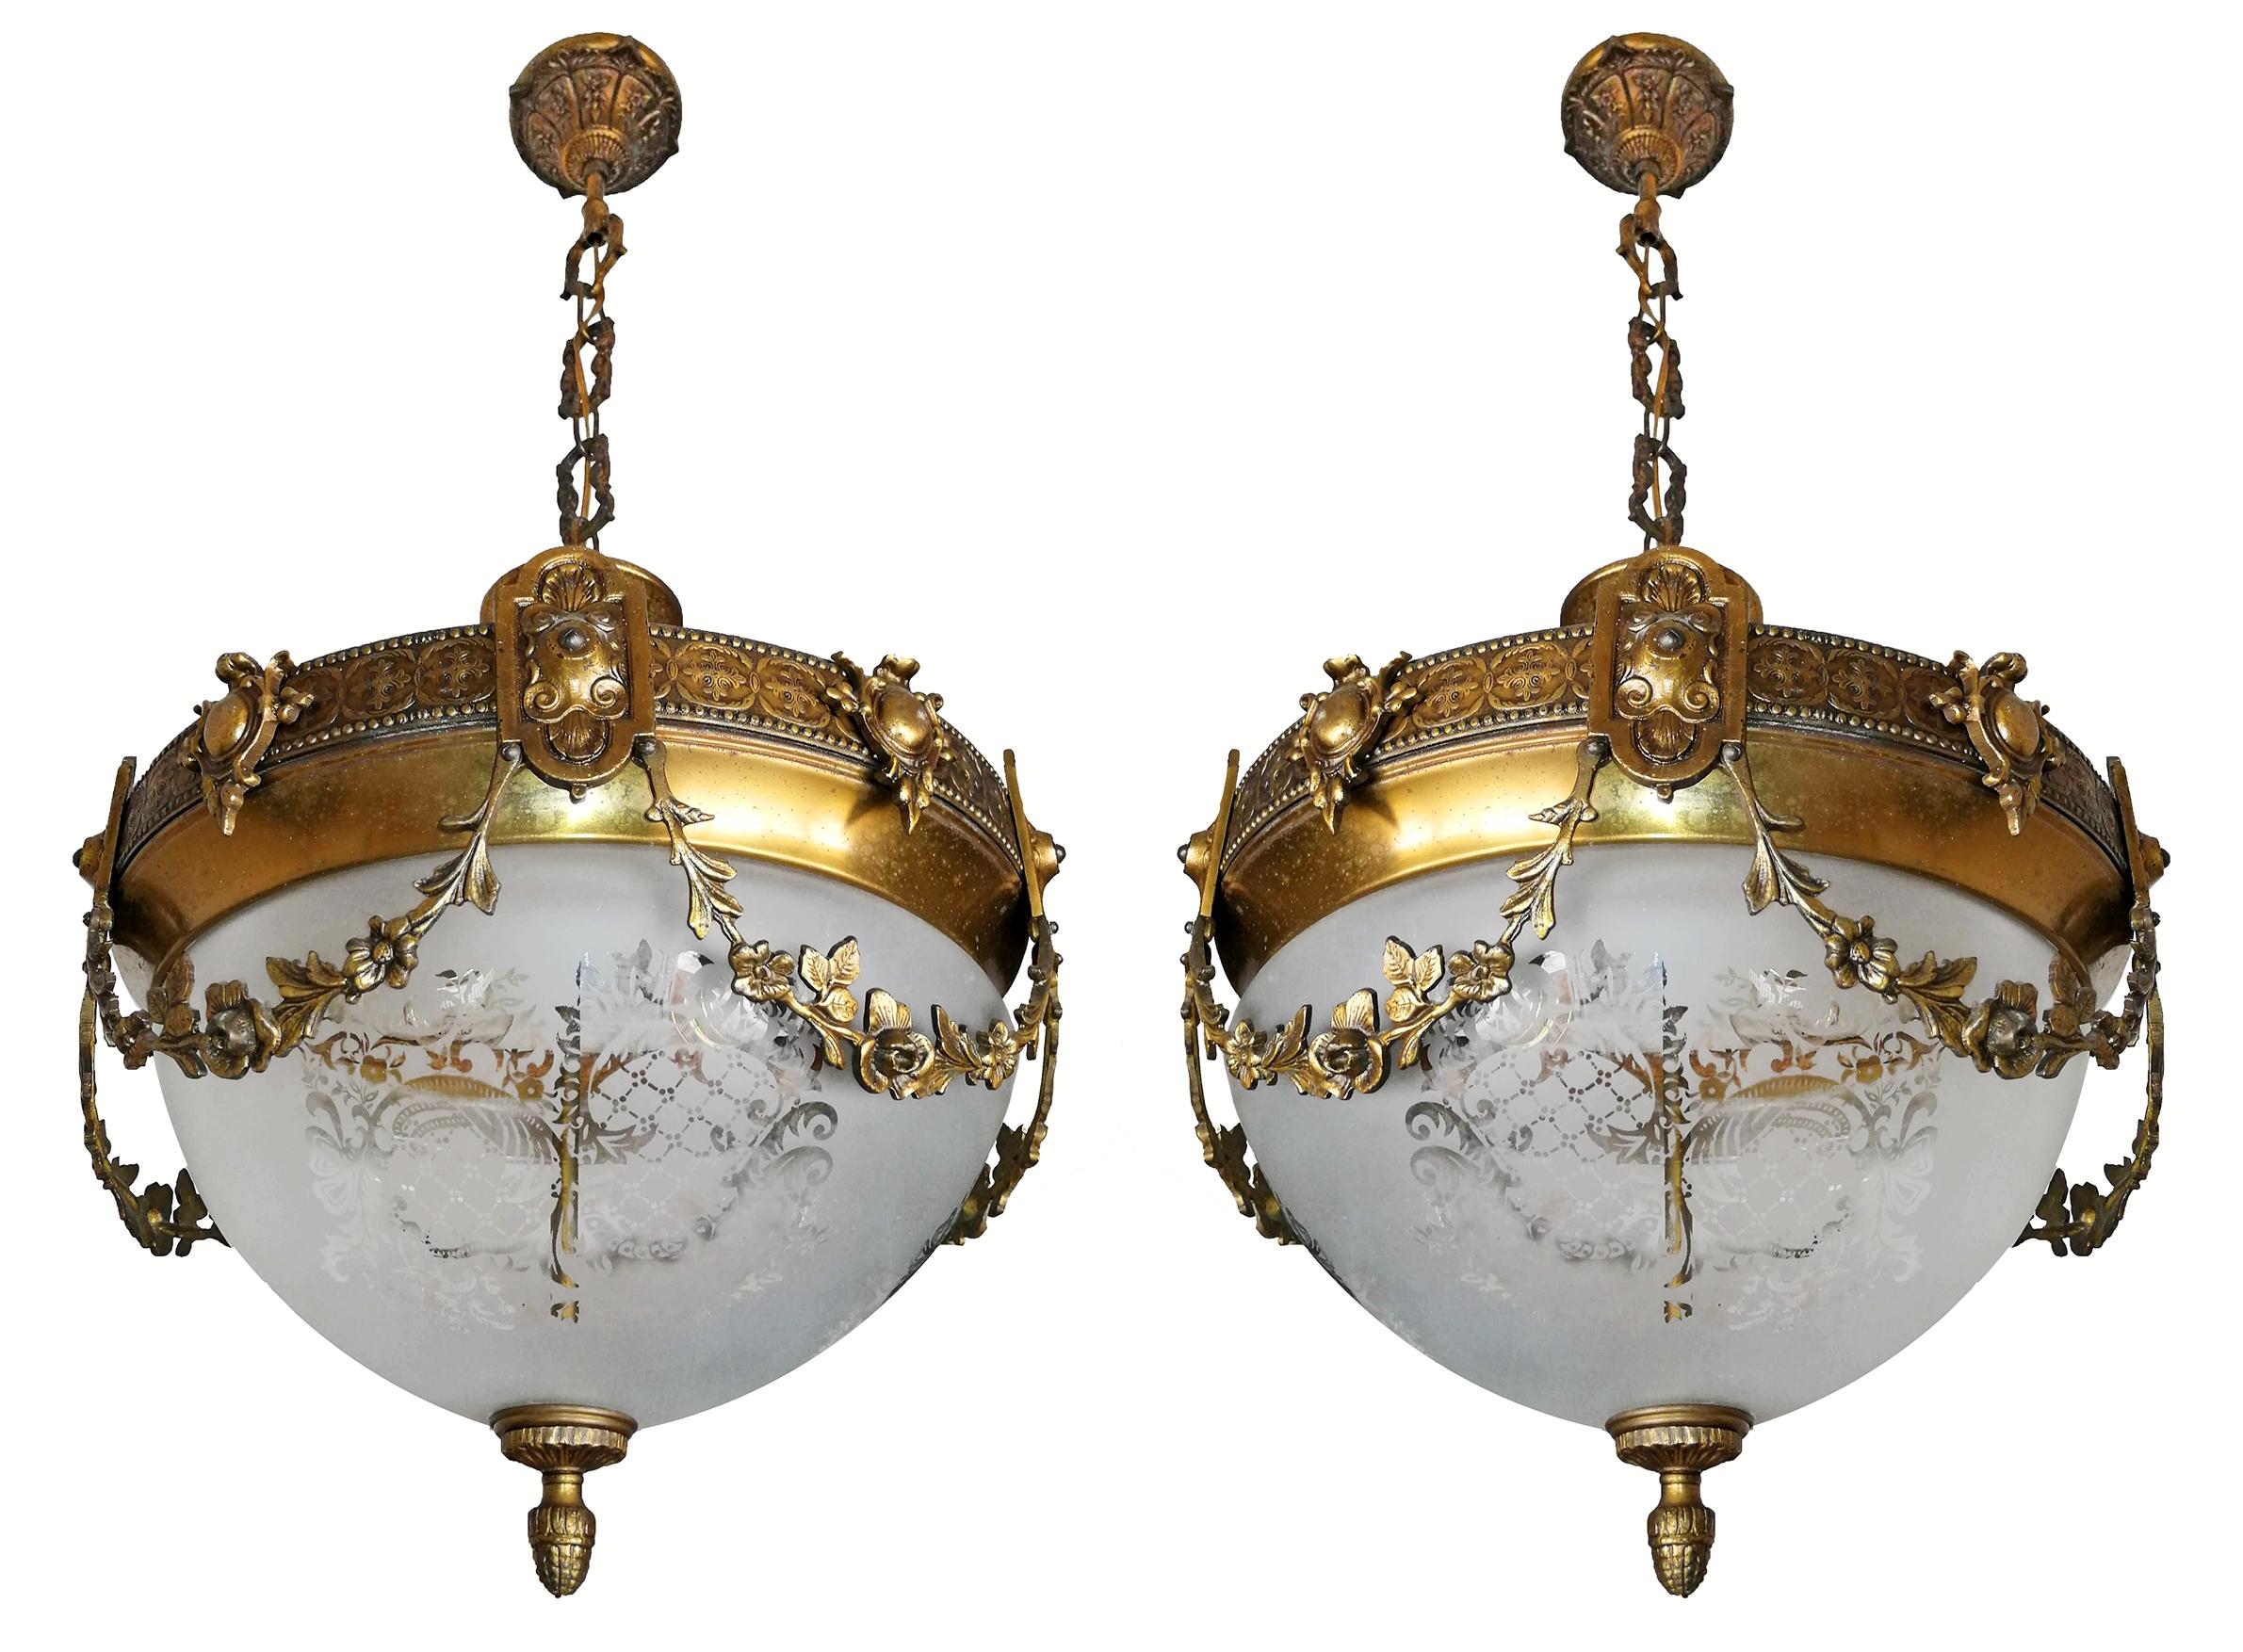 A wonderful pair of gilt bronze and etched-glass two-light ceiling fixtures decorated with fine ornaments and garlands, France, early 20th century.
In very good condition - original etched-glass shades without damages, bronze with beautiful